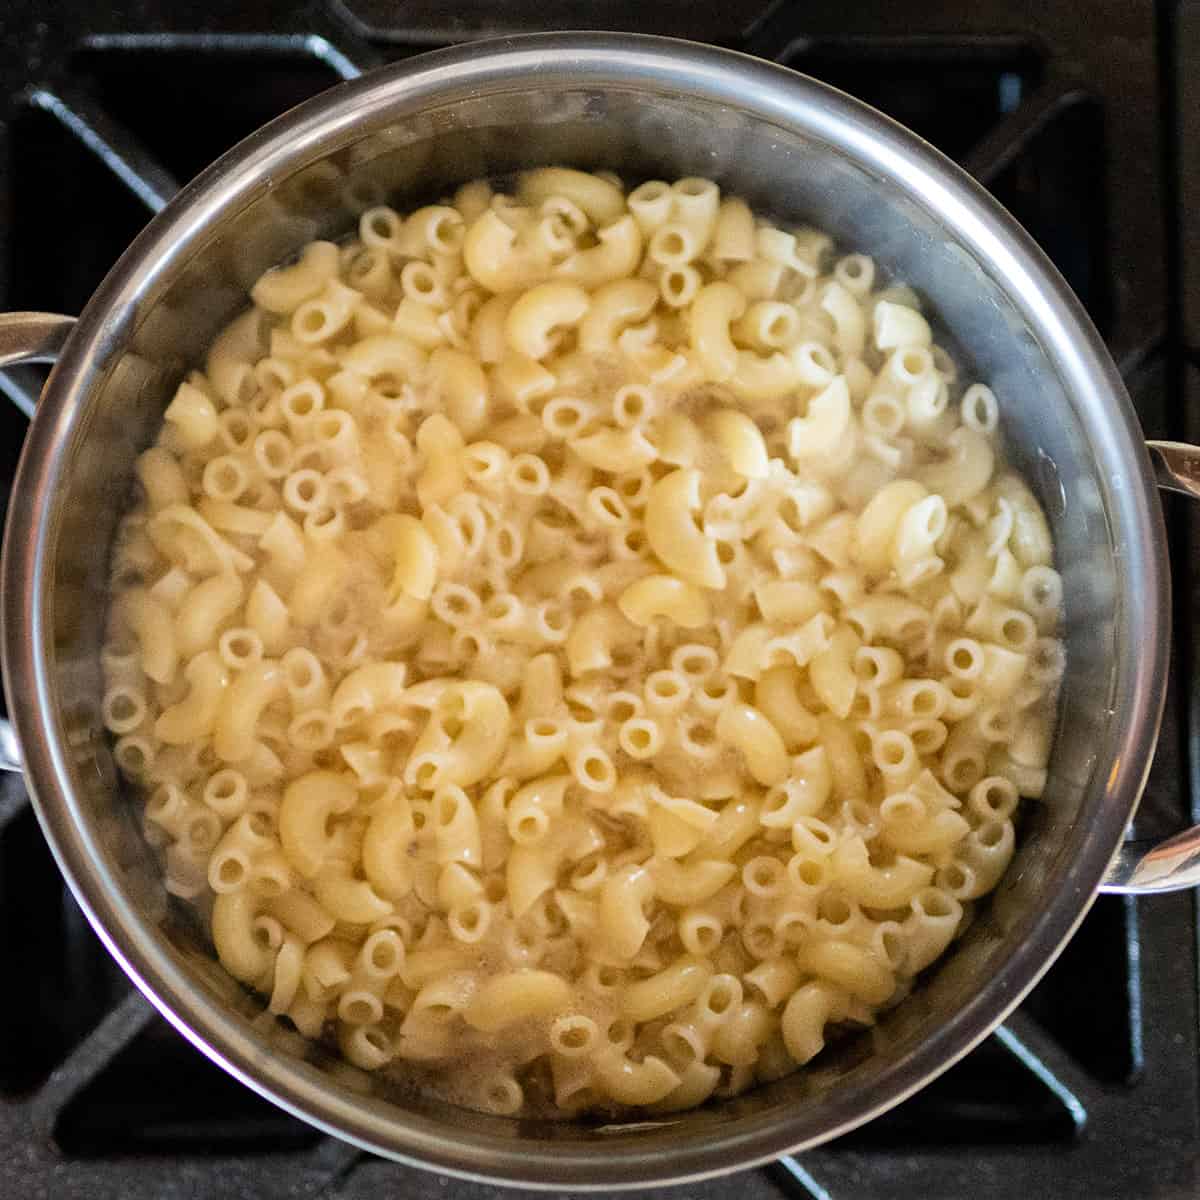 macaroni noodles boiling in pot on stove.